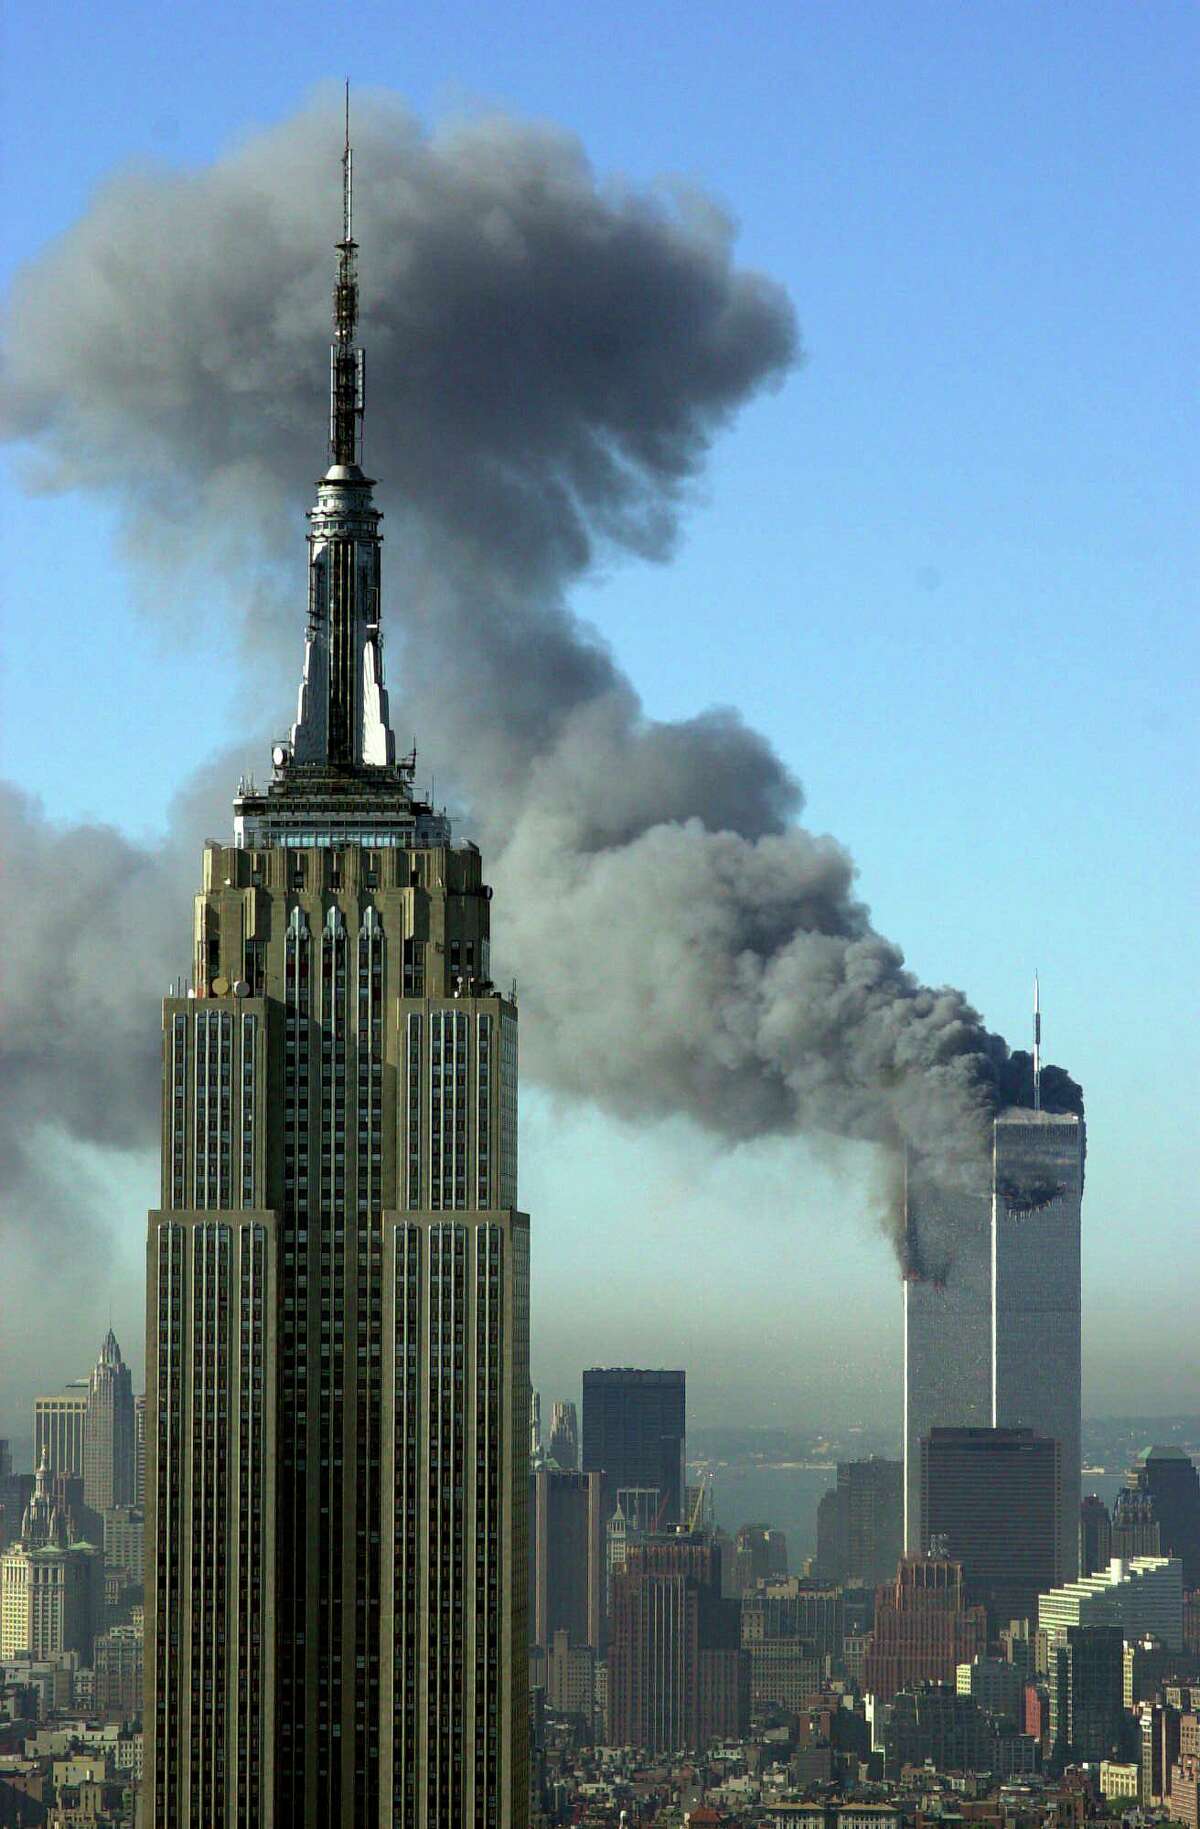 Smoke billows across the New York City skyline after two hijacked planes crashed into the twin towers.